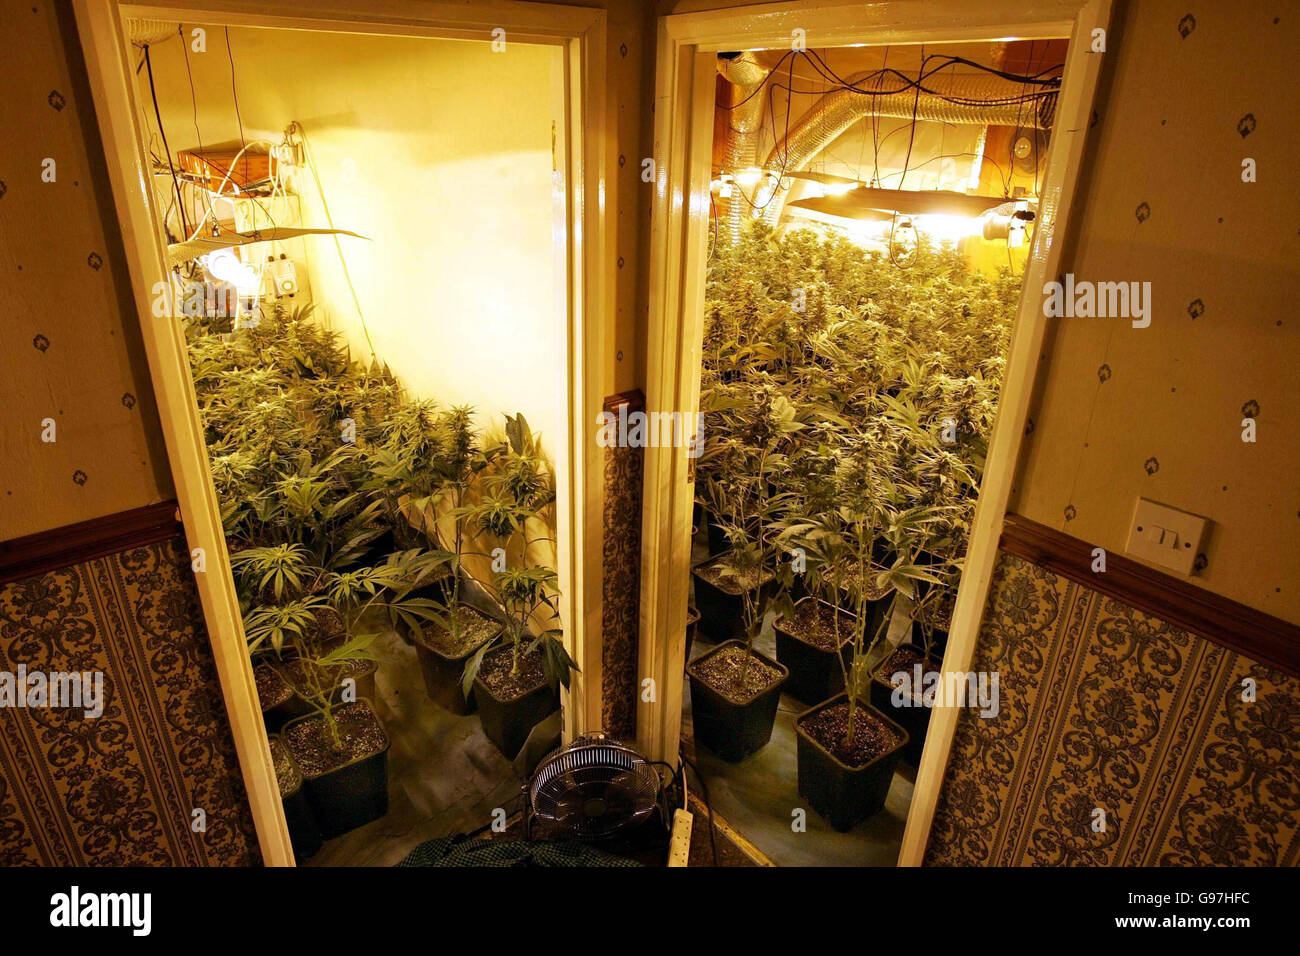 Rooms full of professionally lit and aerated growing plants are found after a police raid on a Woolwich property, London, Wednesday March 15, 2006, which uncovered a vast network of cannabis factories run by Vietnamese gangs and producing tens of millions of pounds worth of drugs. Officers found around 600 cannabis plants spread across four floors and a total of seven people were arrested in connection with the raid. See PA Story POLICE Cannabis. PRESS ASSOCIATION Photo. Photo credit should read: Glenn Copus/The Evening Standard/Pool/PA. Stock Photo